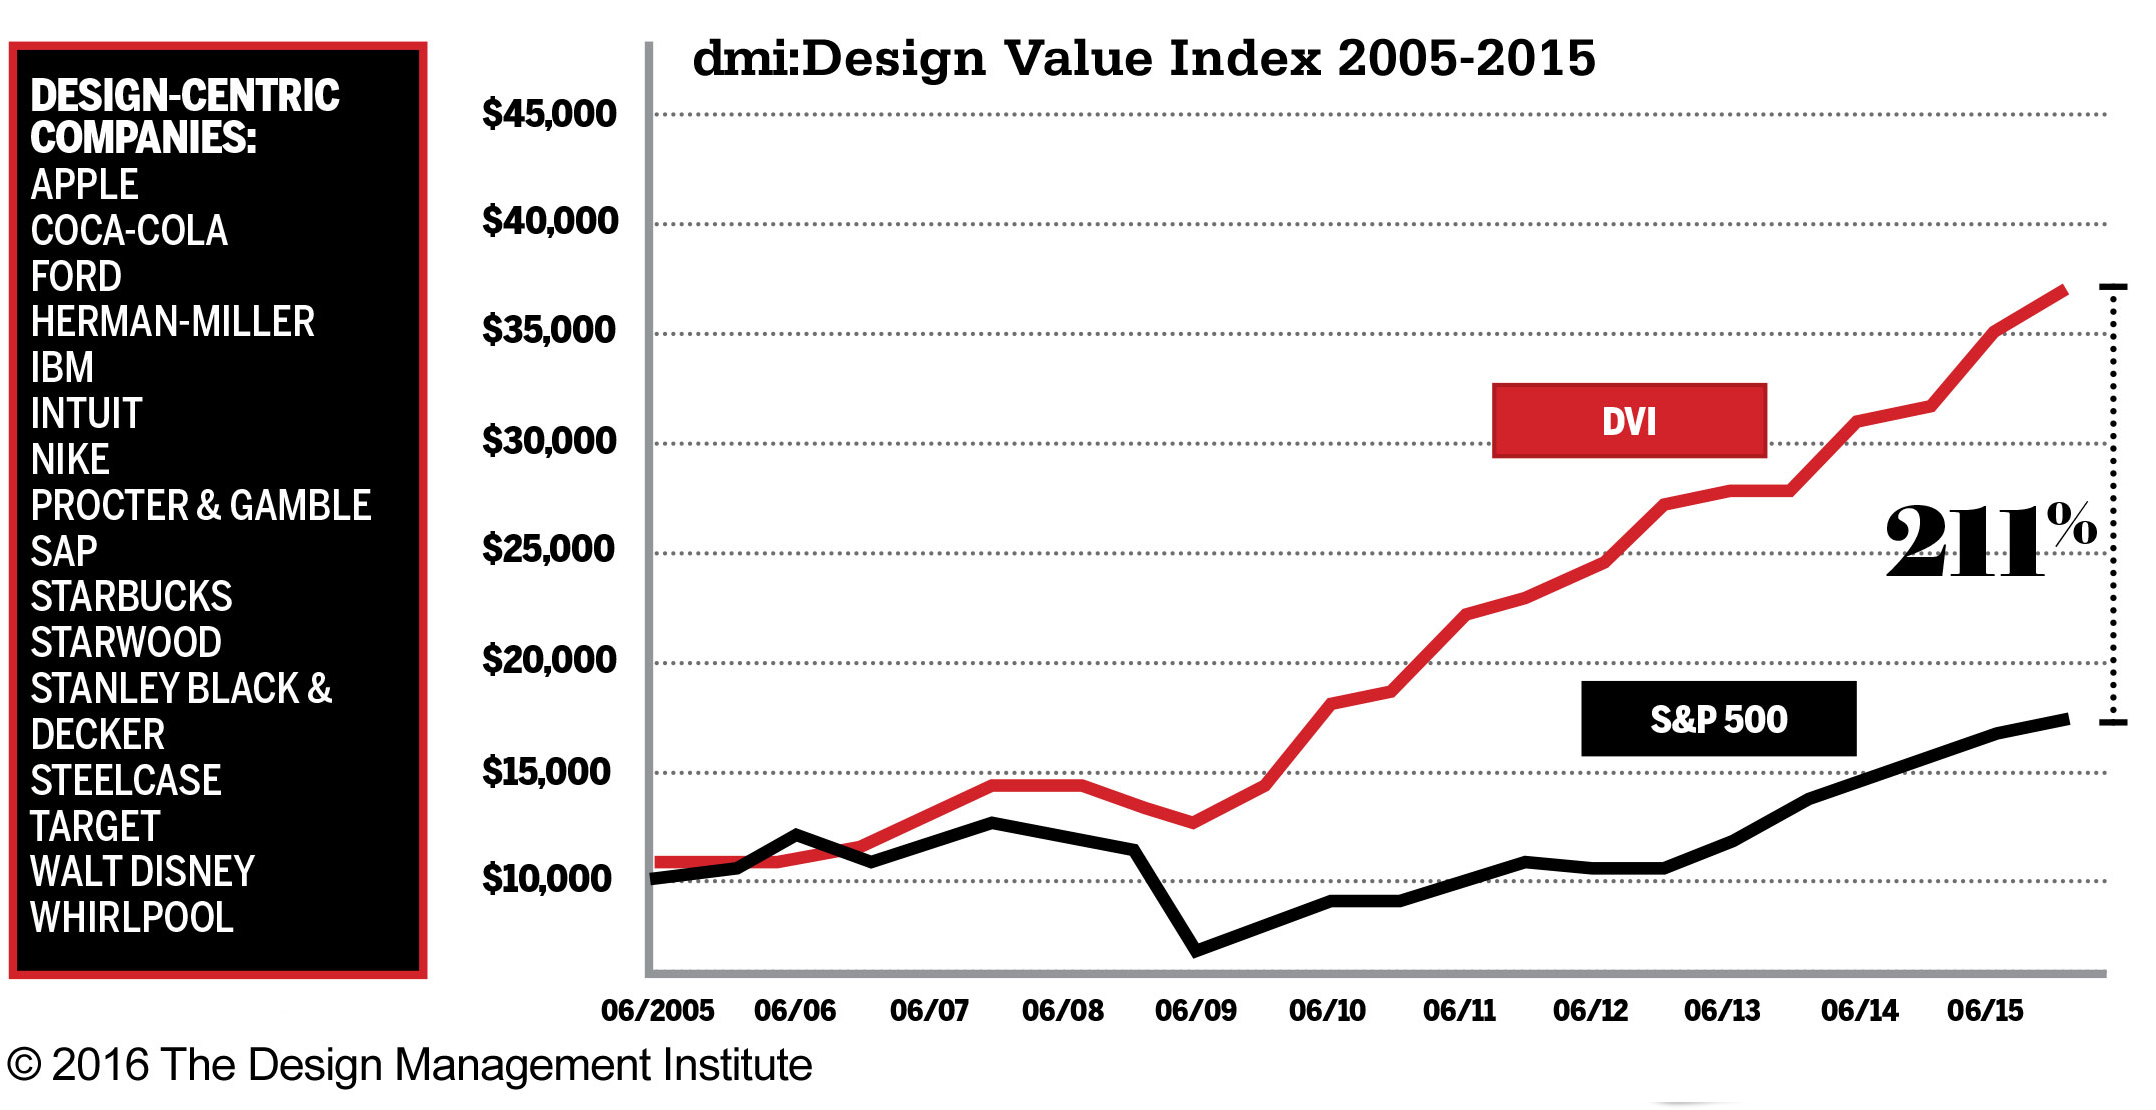 Design Value Index 2005 to 2015 shows design-centric companies have 211% higher revenue than those that don't. 